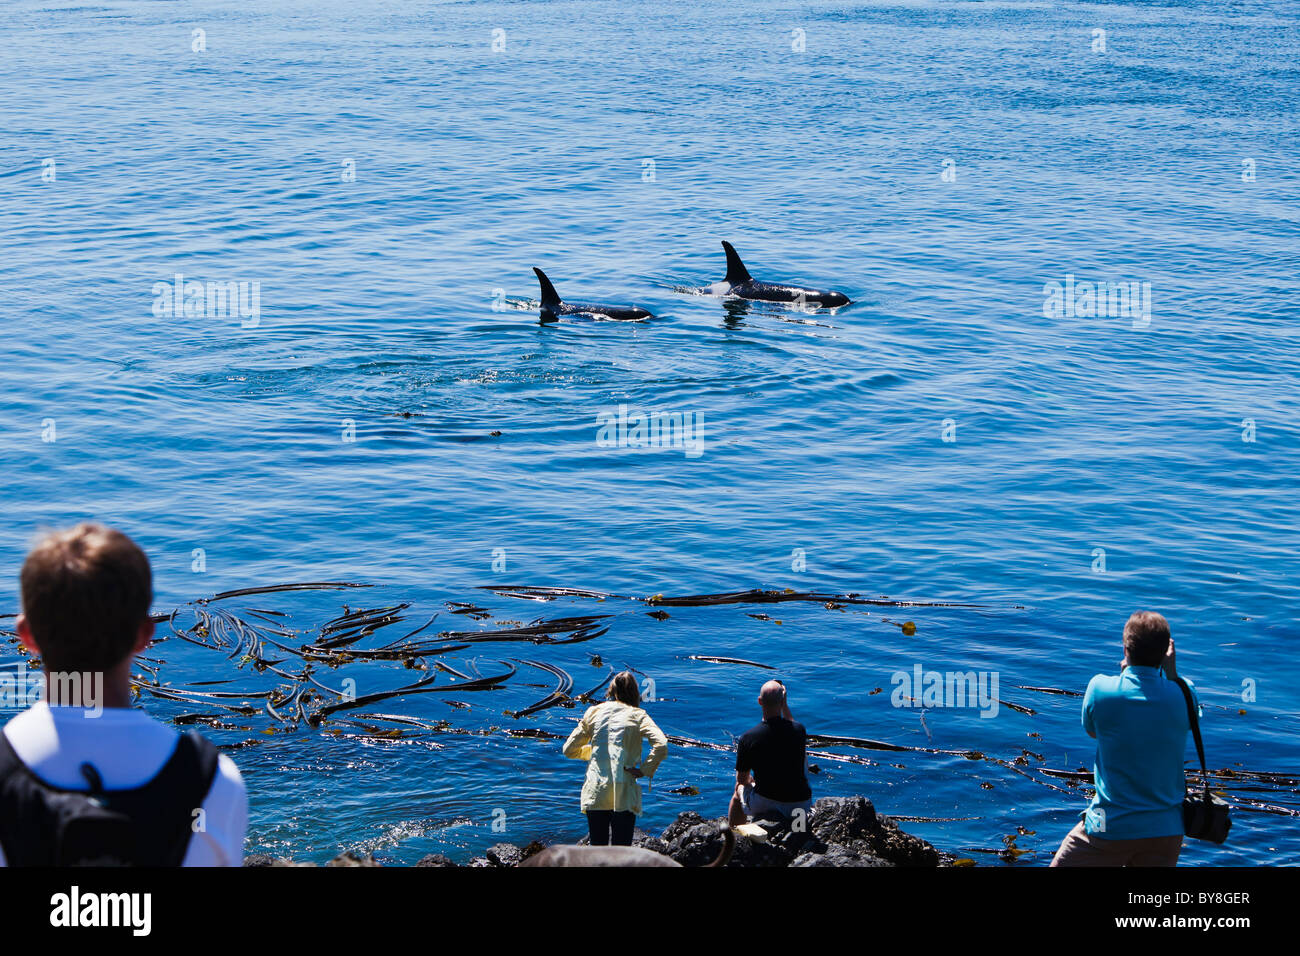 Tourists watch on as a Mother and juvenile Orca pass by Lime Kiln State Park on San Juan Island, Washington, USA. Stock Photo